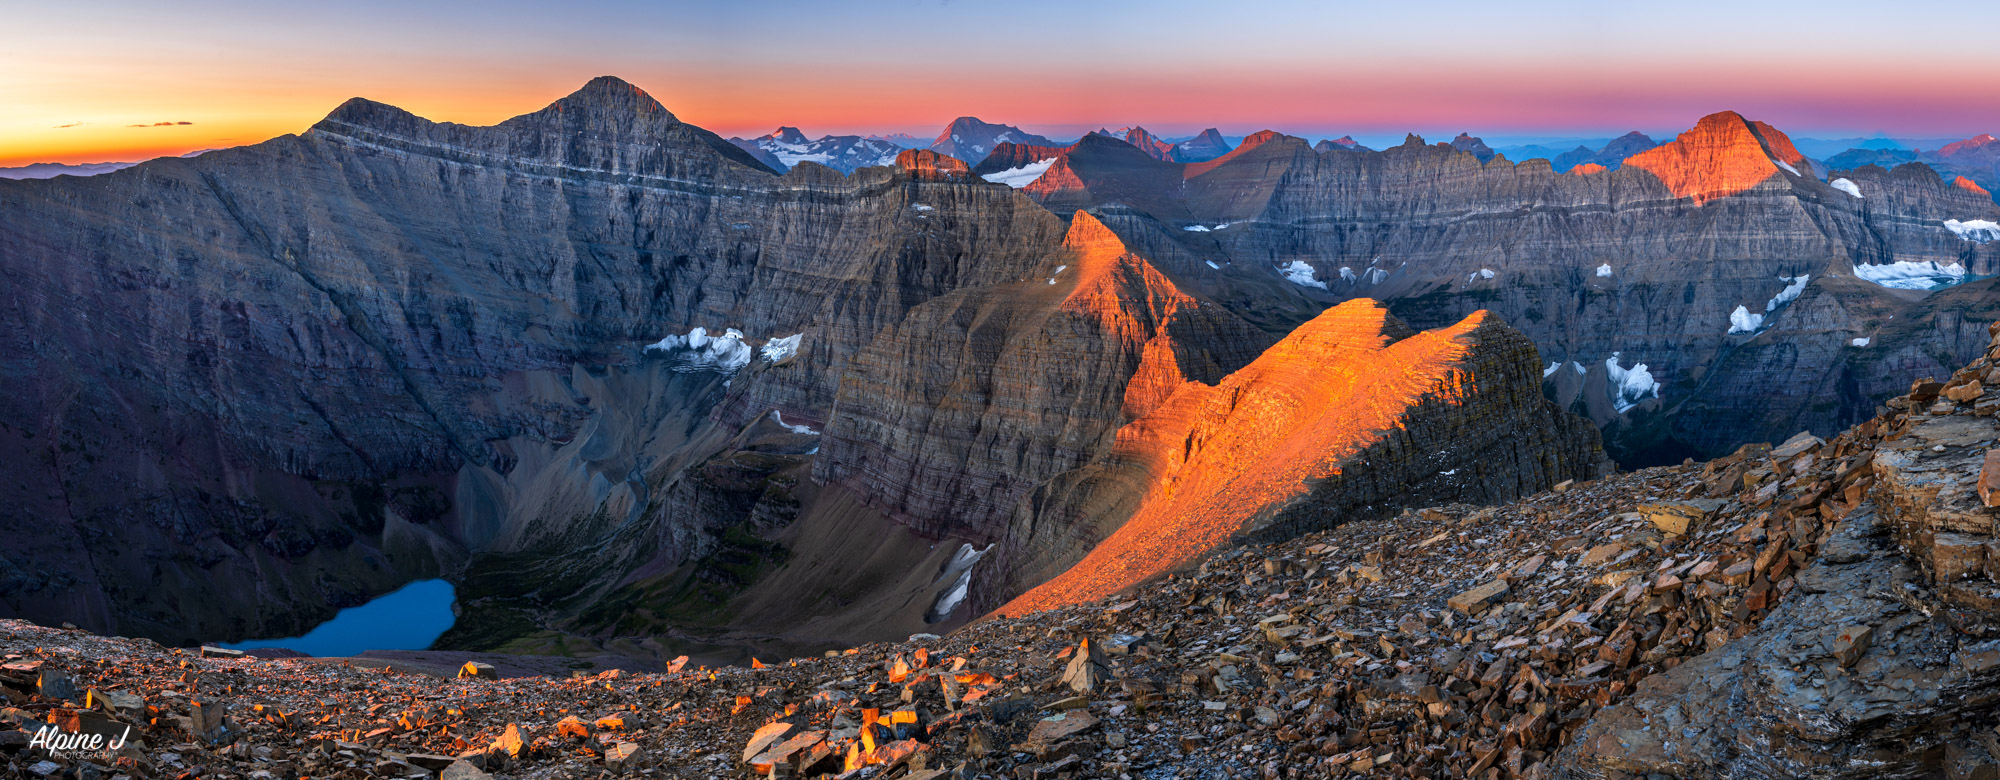 Sunrise from a mountain top over Glacier National Park, Montana. 